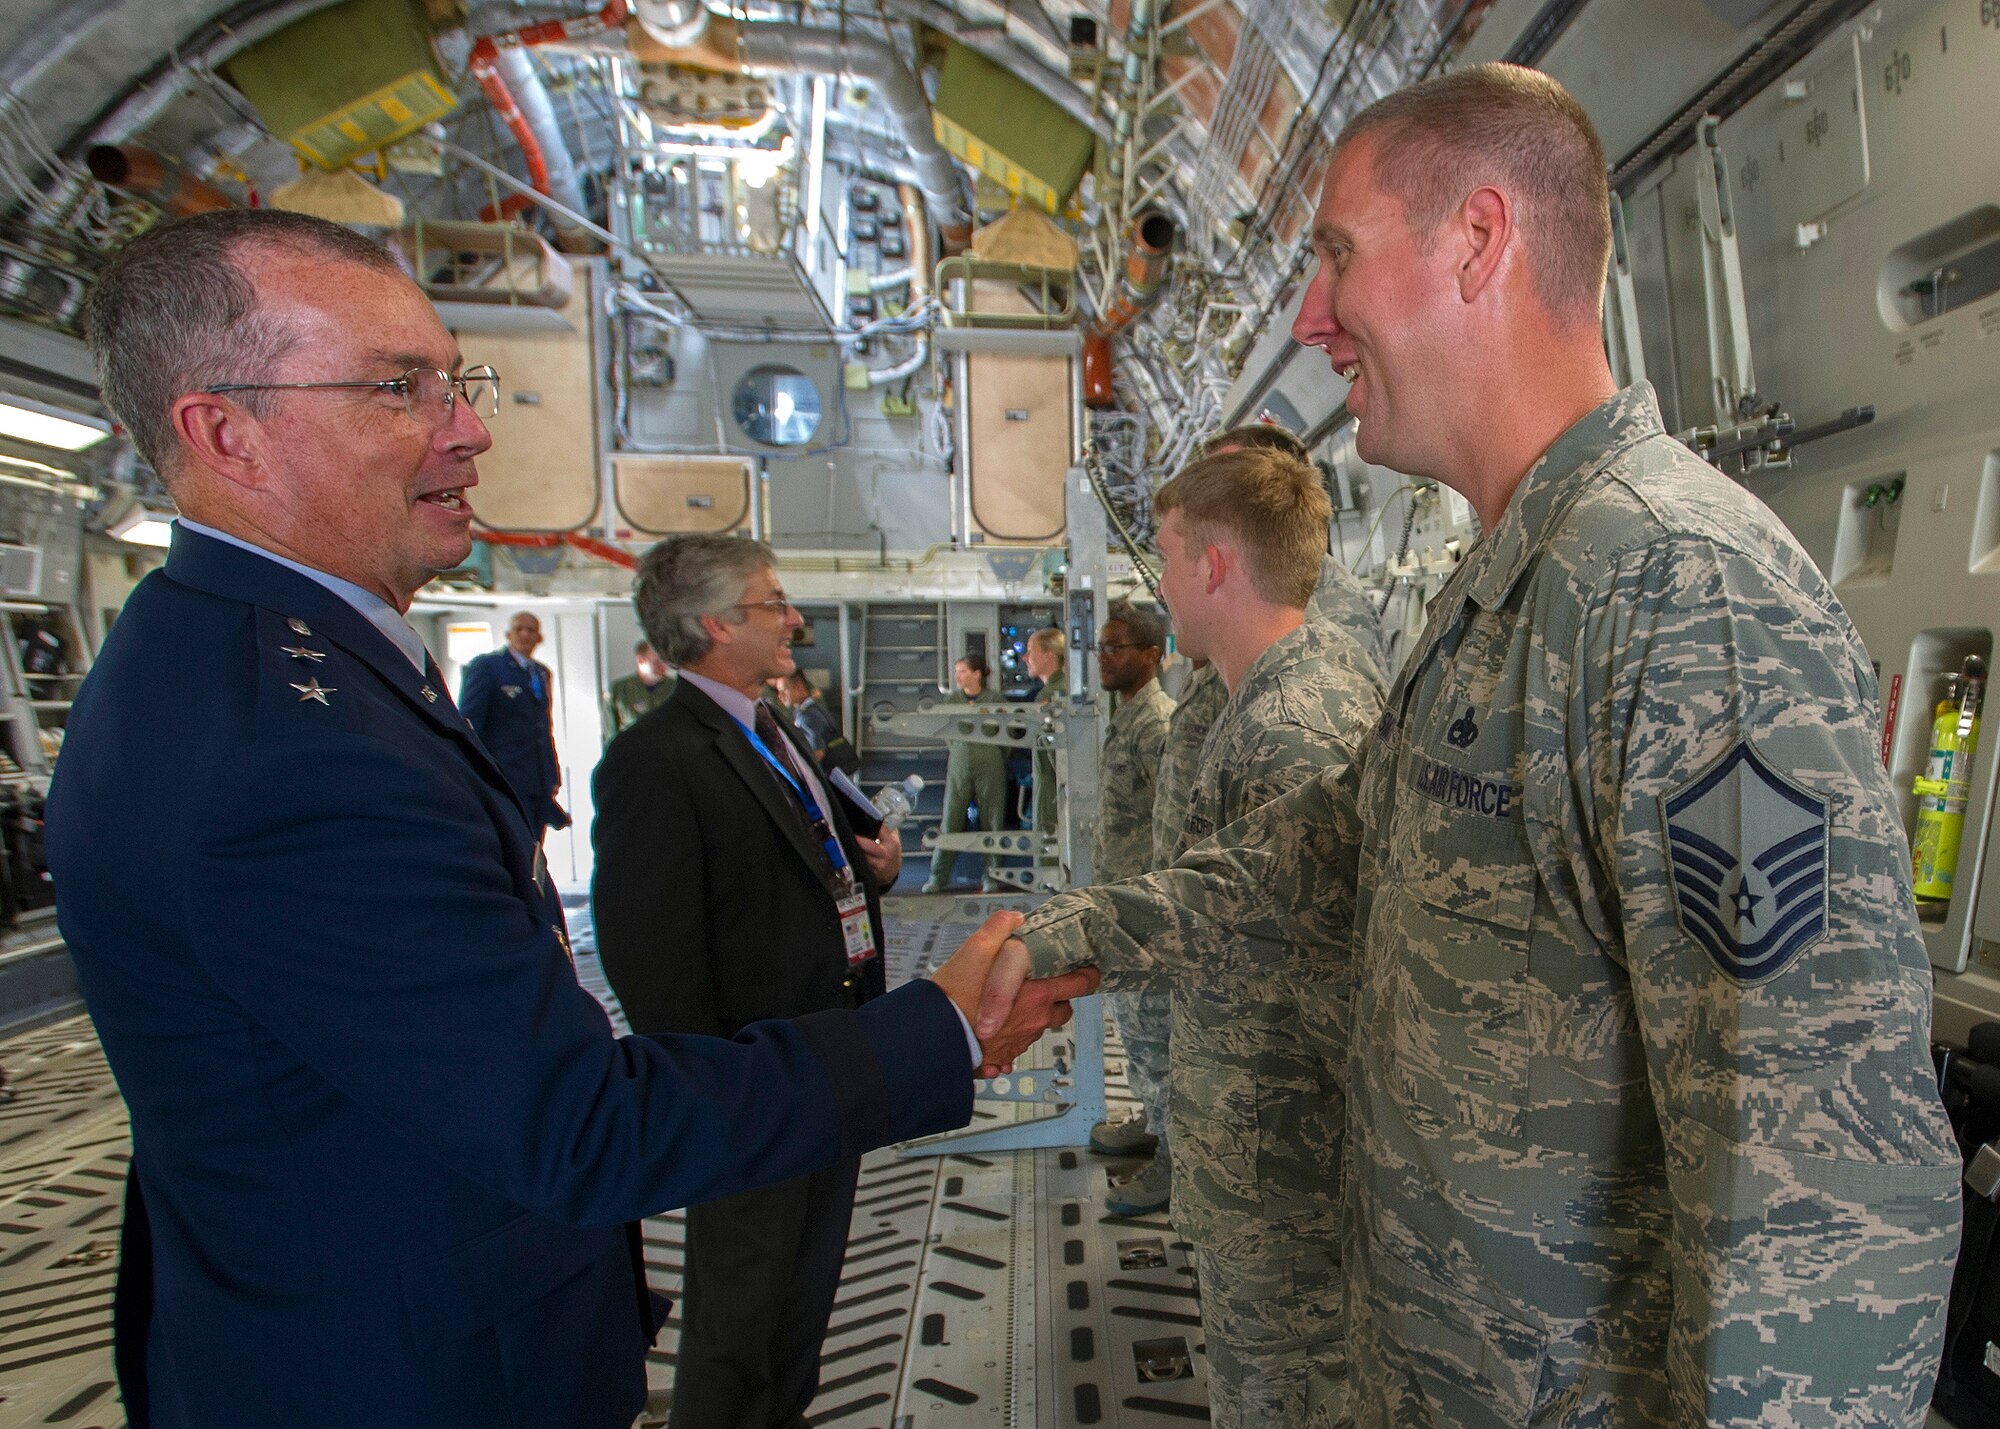 Maj. Gen. Paul H. McGillicuddy, Pacific Air Forces chief of staff, thanks Master Sgt. Matt Smith, 15th Aircraft Maintenance Squadron maintenance lead, for all his team’s hard work during the 4th biennial Brunei Darussalam International Defense Exhibition aboard a C-17 Globemaster III at Rimba Air Base, Dec. 3, 2013. JBPPH personnel will be showcasing the C-17 through static displays and aerial demonstrations during BRIDEX. The exhibition is an opportunity for networking and sharing technology with regional partners and allies, building strong multilateral relationships, increased cooperation and enhanced preparedness for disasters and other contingency operations. (U.S. Air Force photo/Master Sgt. Jerome S. Tayborn)